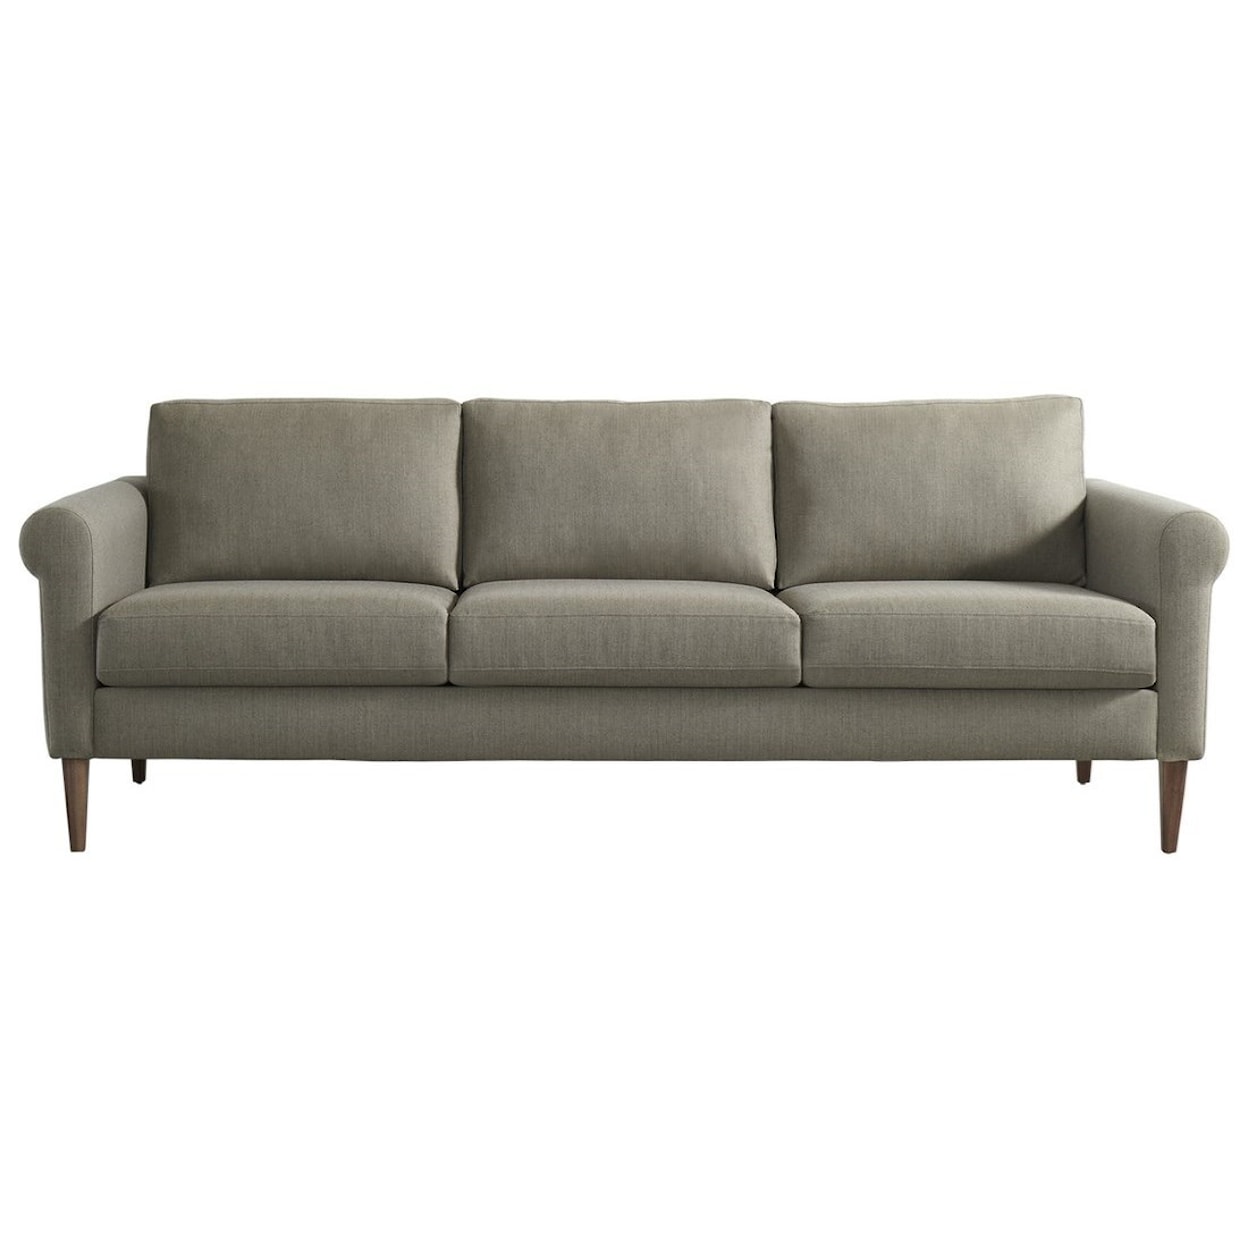 American Leather Rolled Arm - Personalize Rolled Arm Sofa